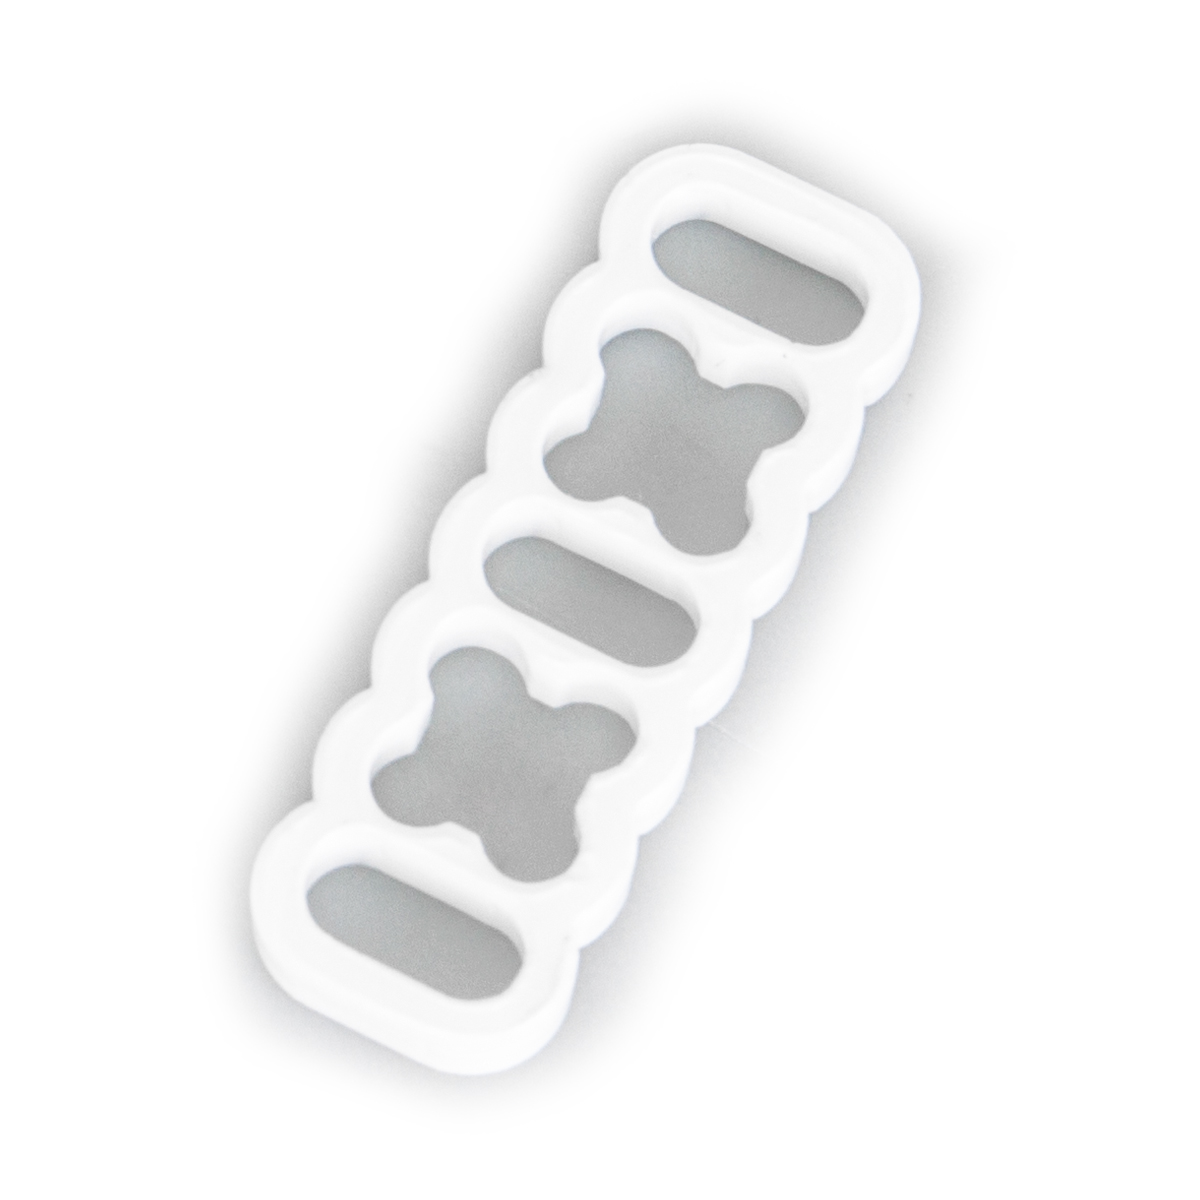 TechForge 14 Slot Stealth Cable Comb V2 - White